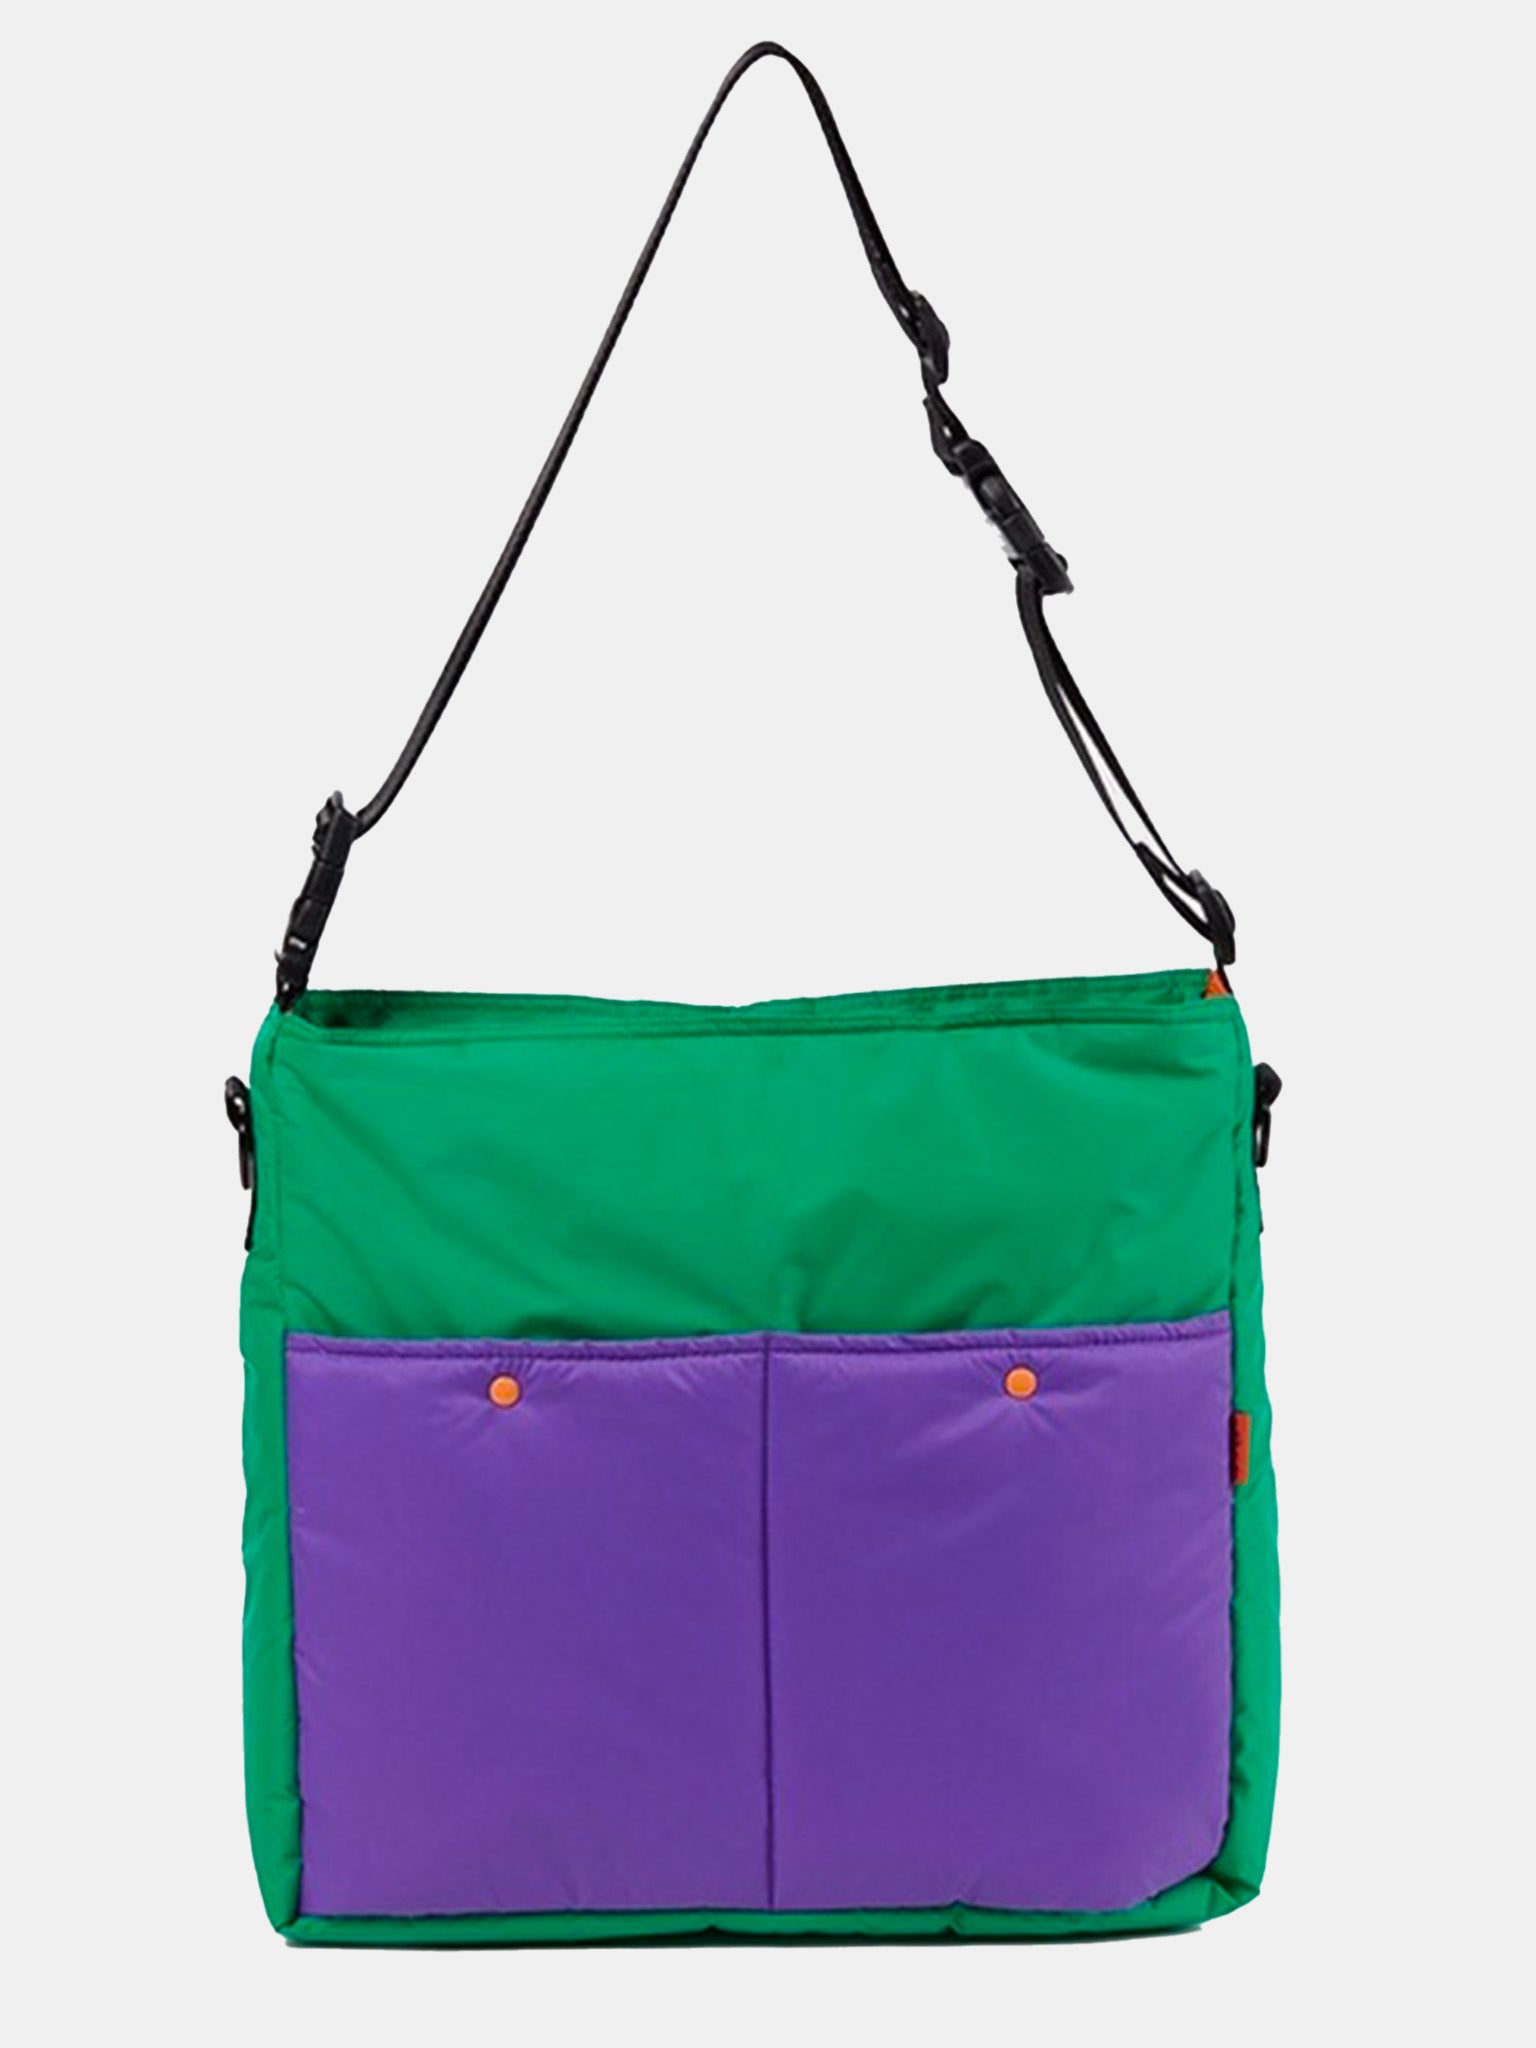 Lively Tote Bag - Green & Purple